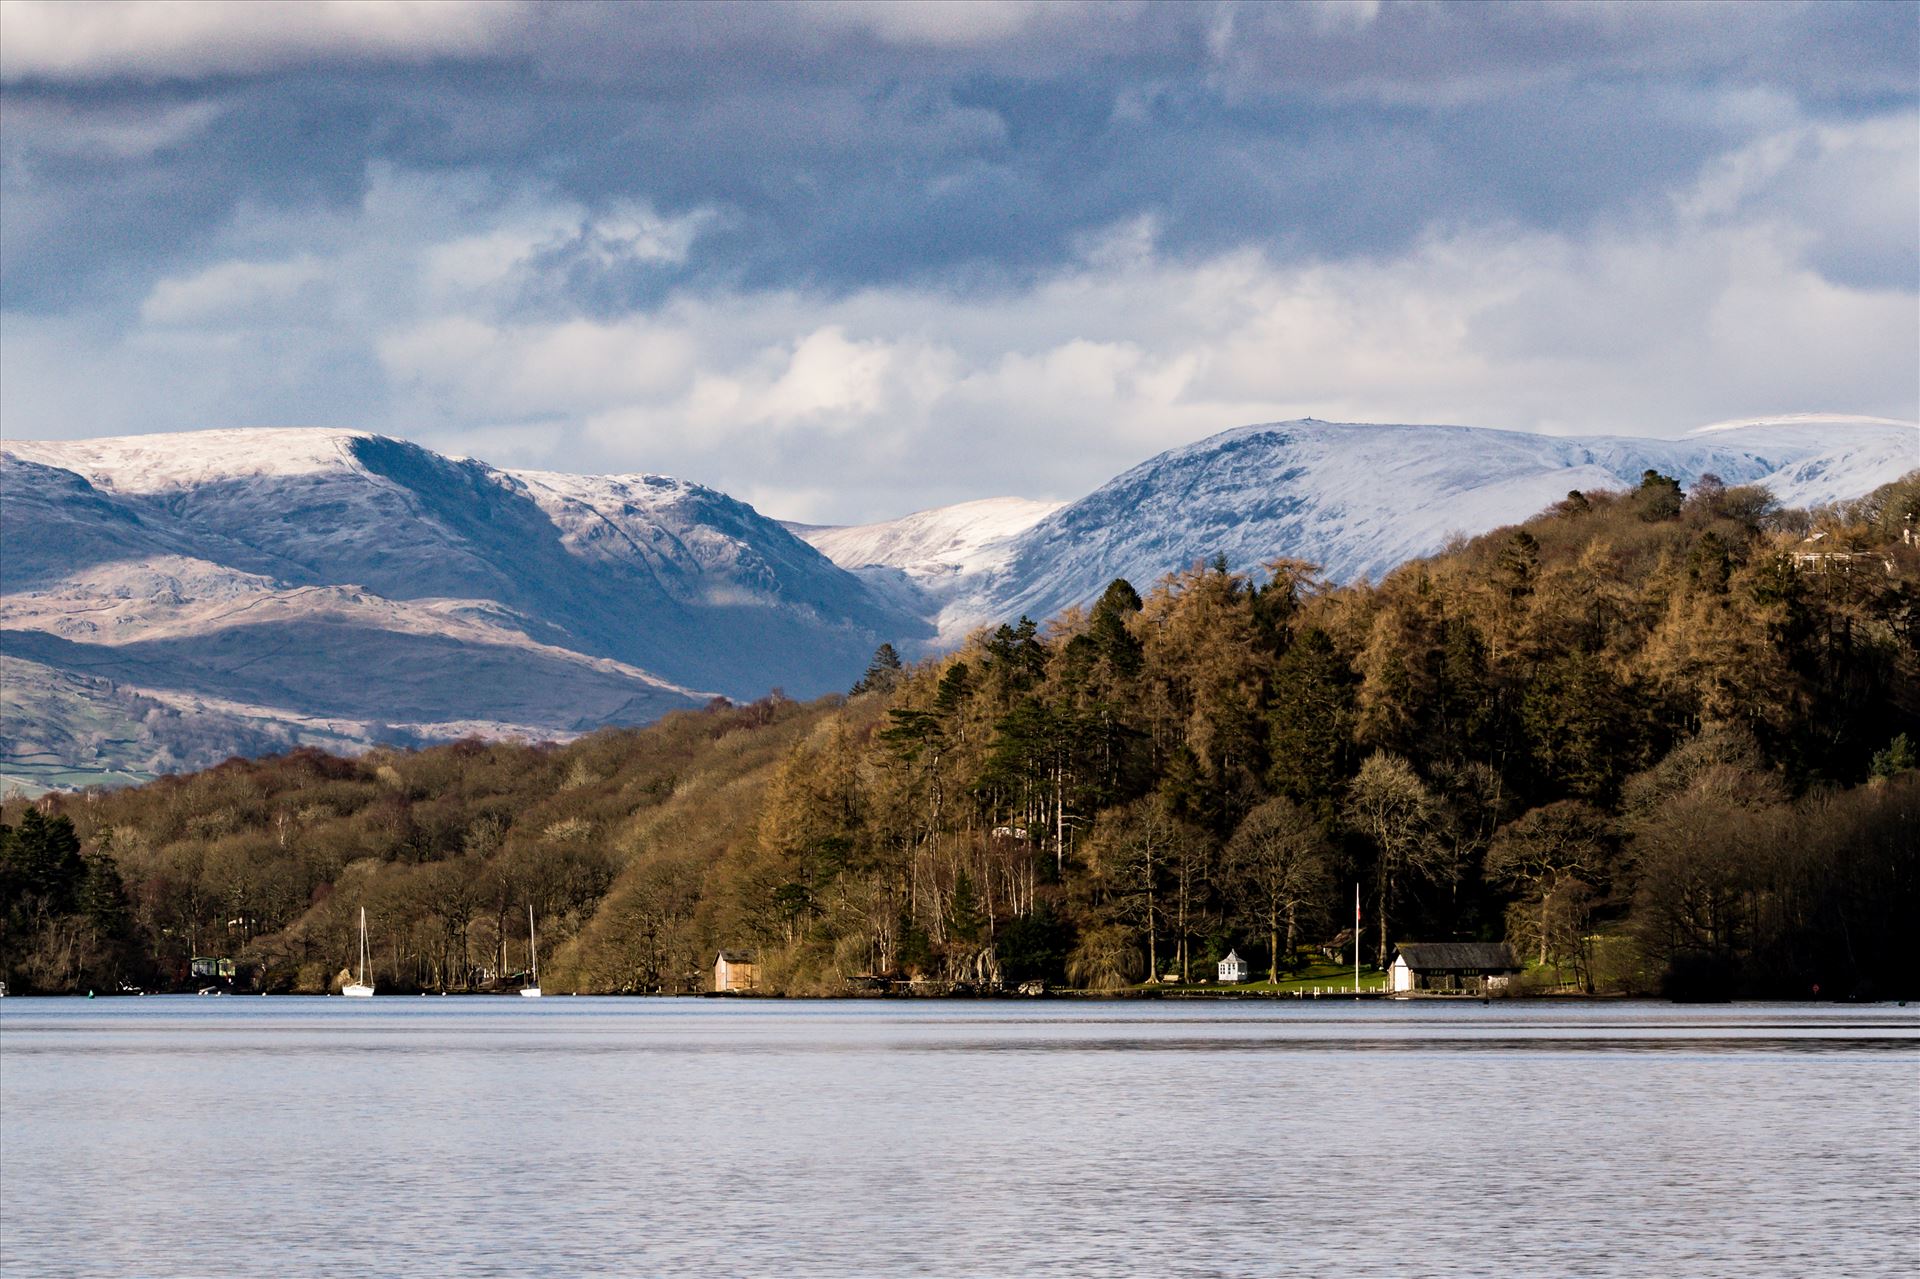 Lake Windermere Winters View - Taken from the south of the lake looking north, by AJ Stoves Photography